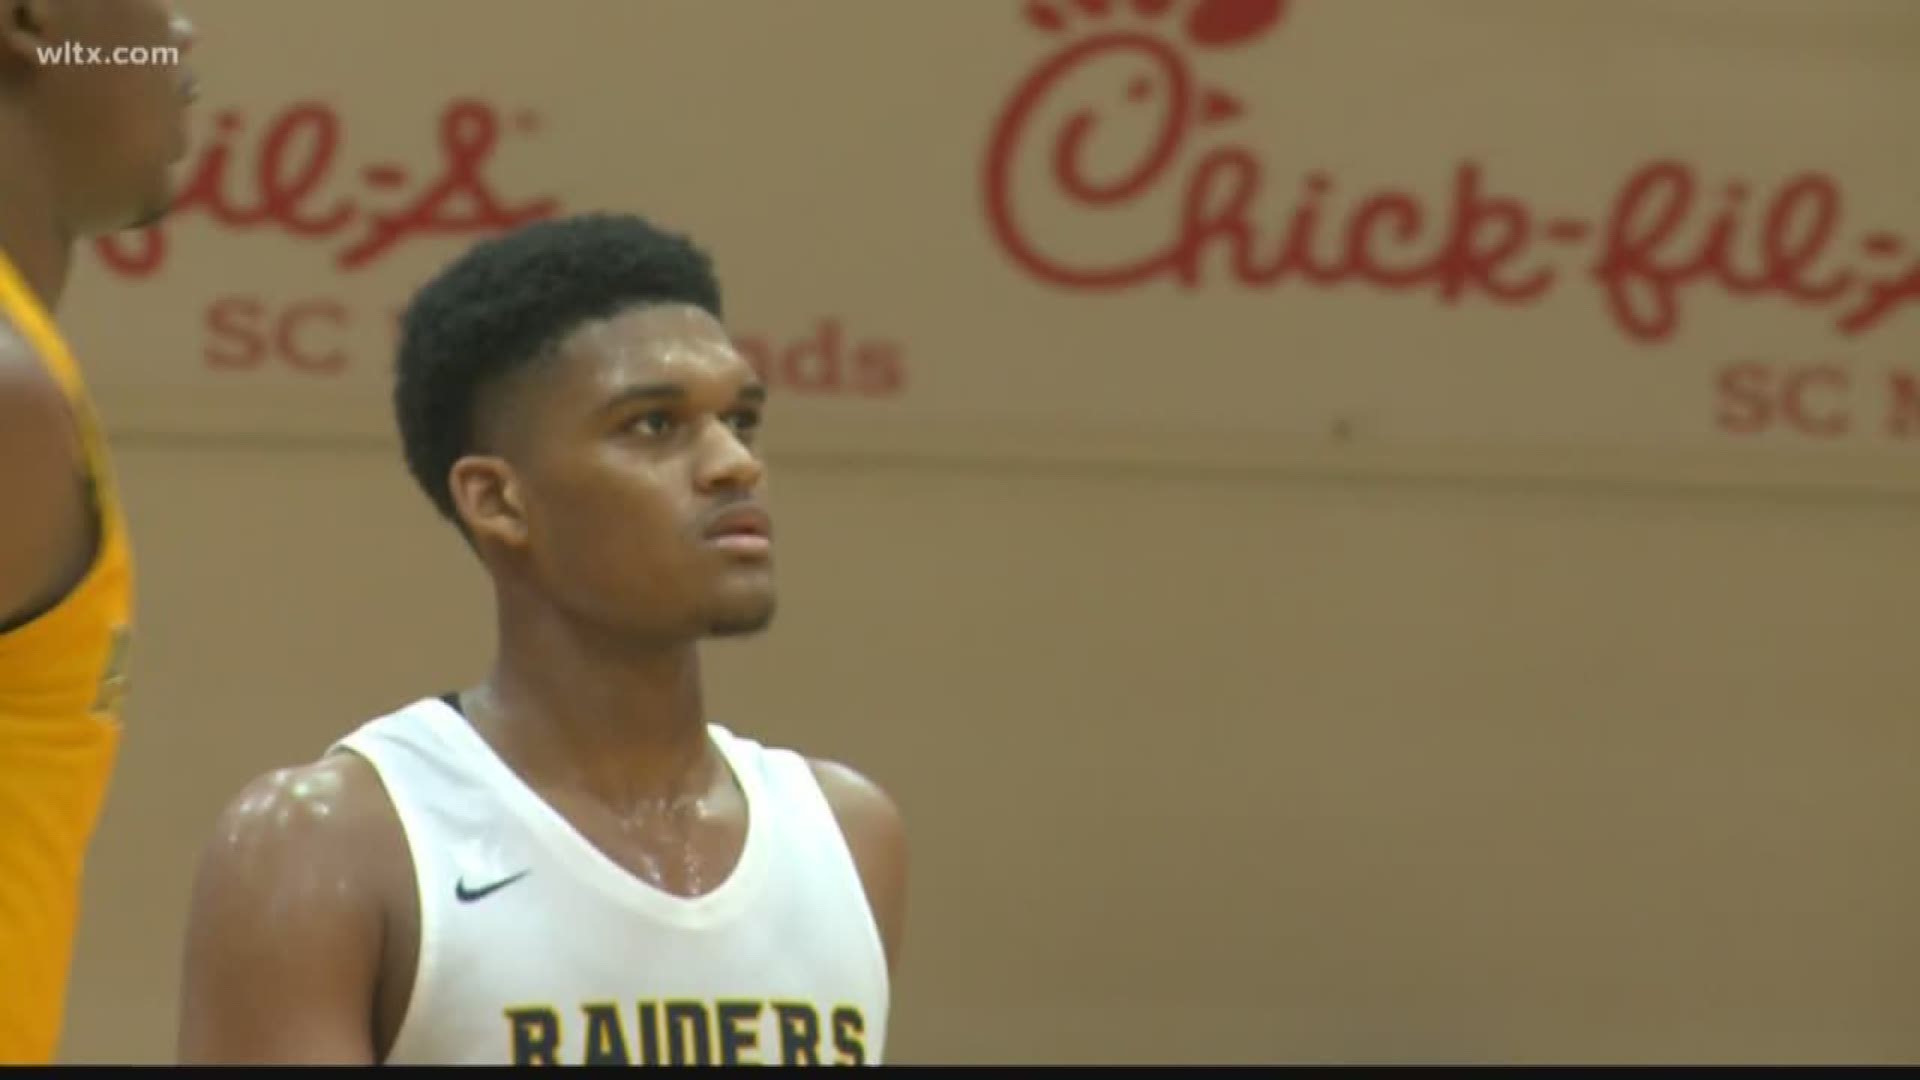 The fourth and final day of the Chick-Fil-A Classic saw W.J. Keenan battle Independence High School from Charlotte for third place in the American Division, while the state's top-ranked team was in the championship game.